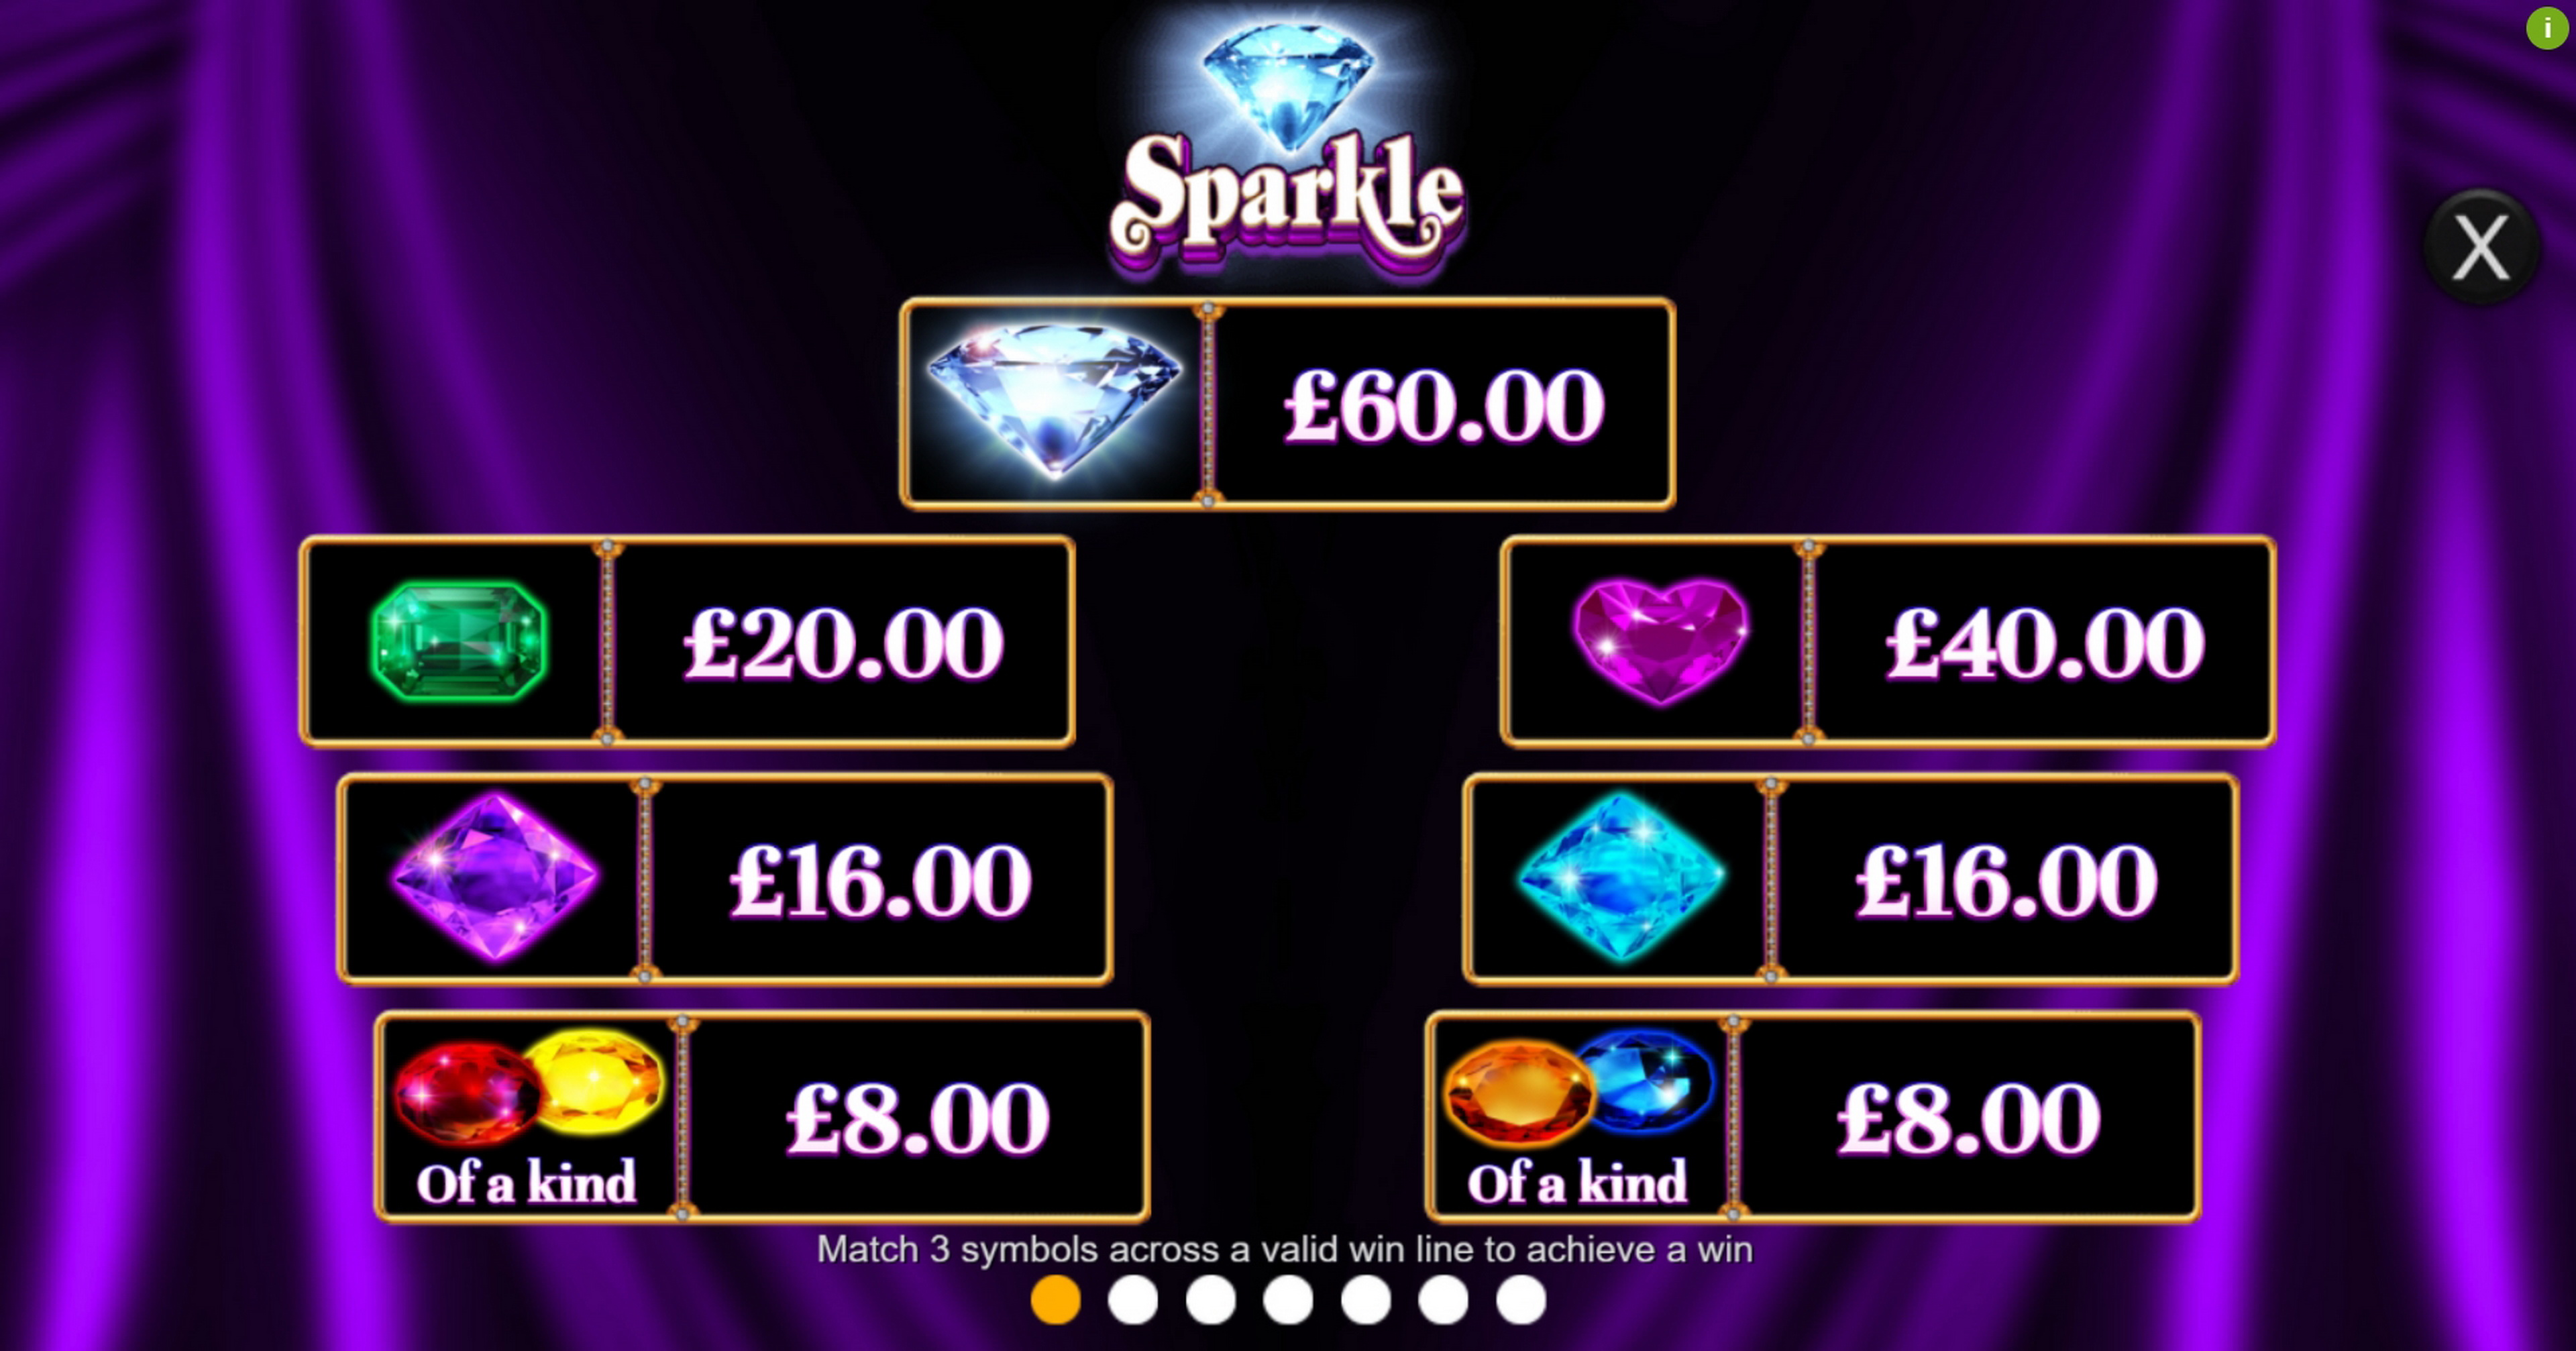 Info of Sparkle Slot Game by Inspired Gaming